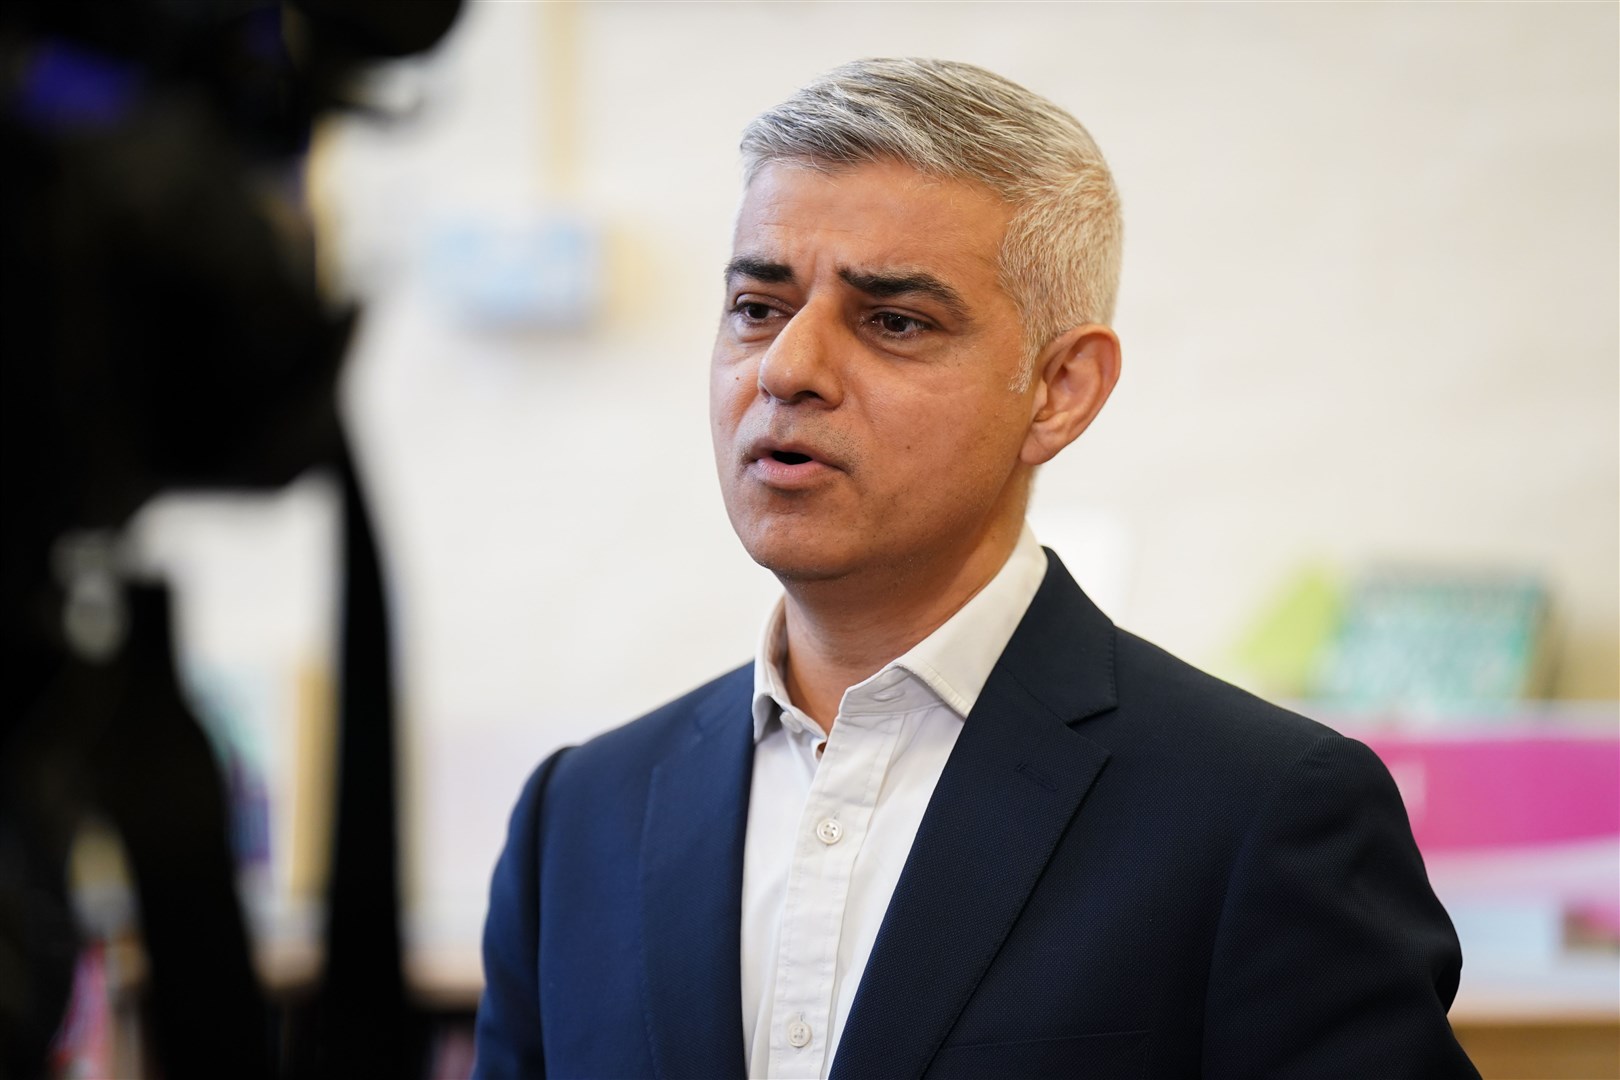 Sadiq Khan said the cost of inaction on air pollution is ‘far too high’ (James Manning/PA)